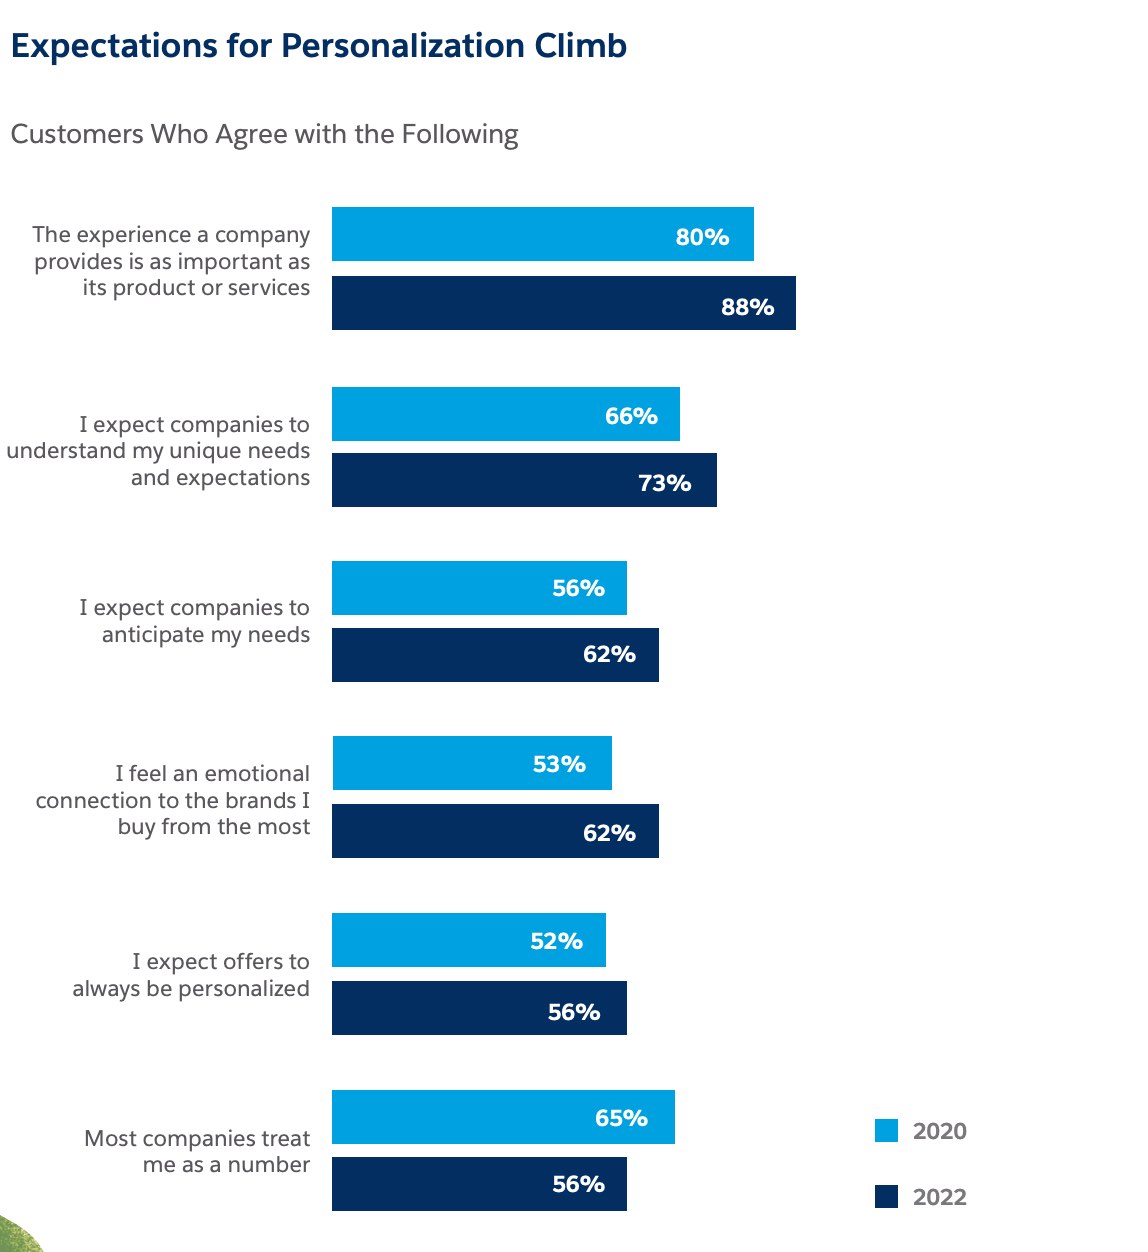 Expectations for personalization climb